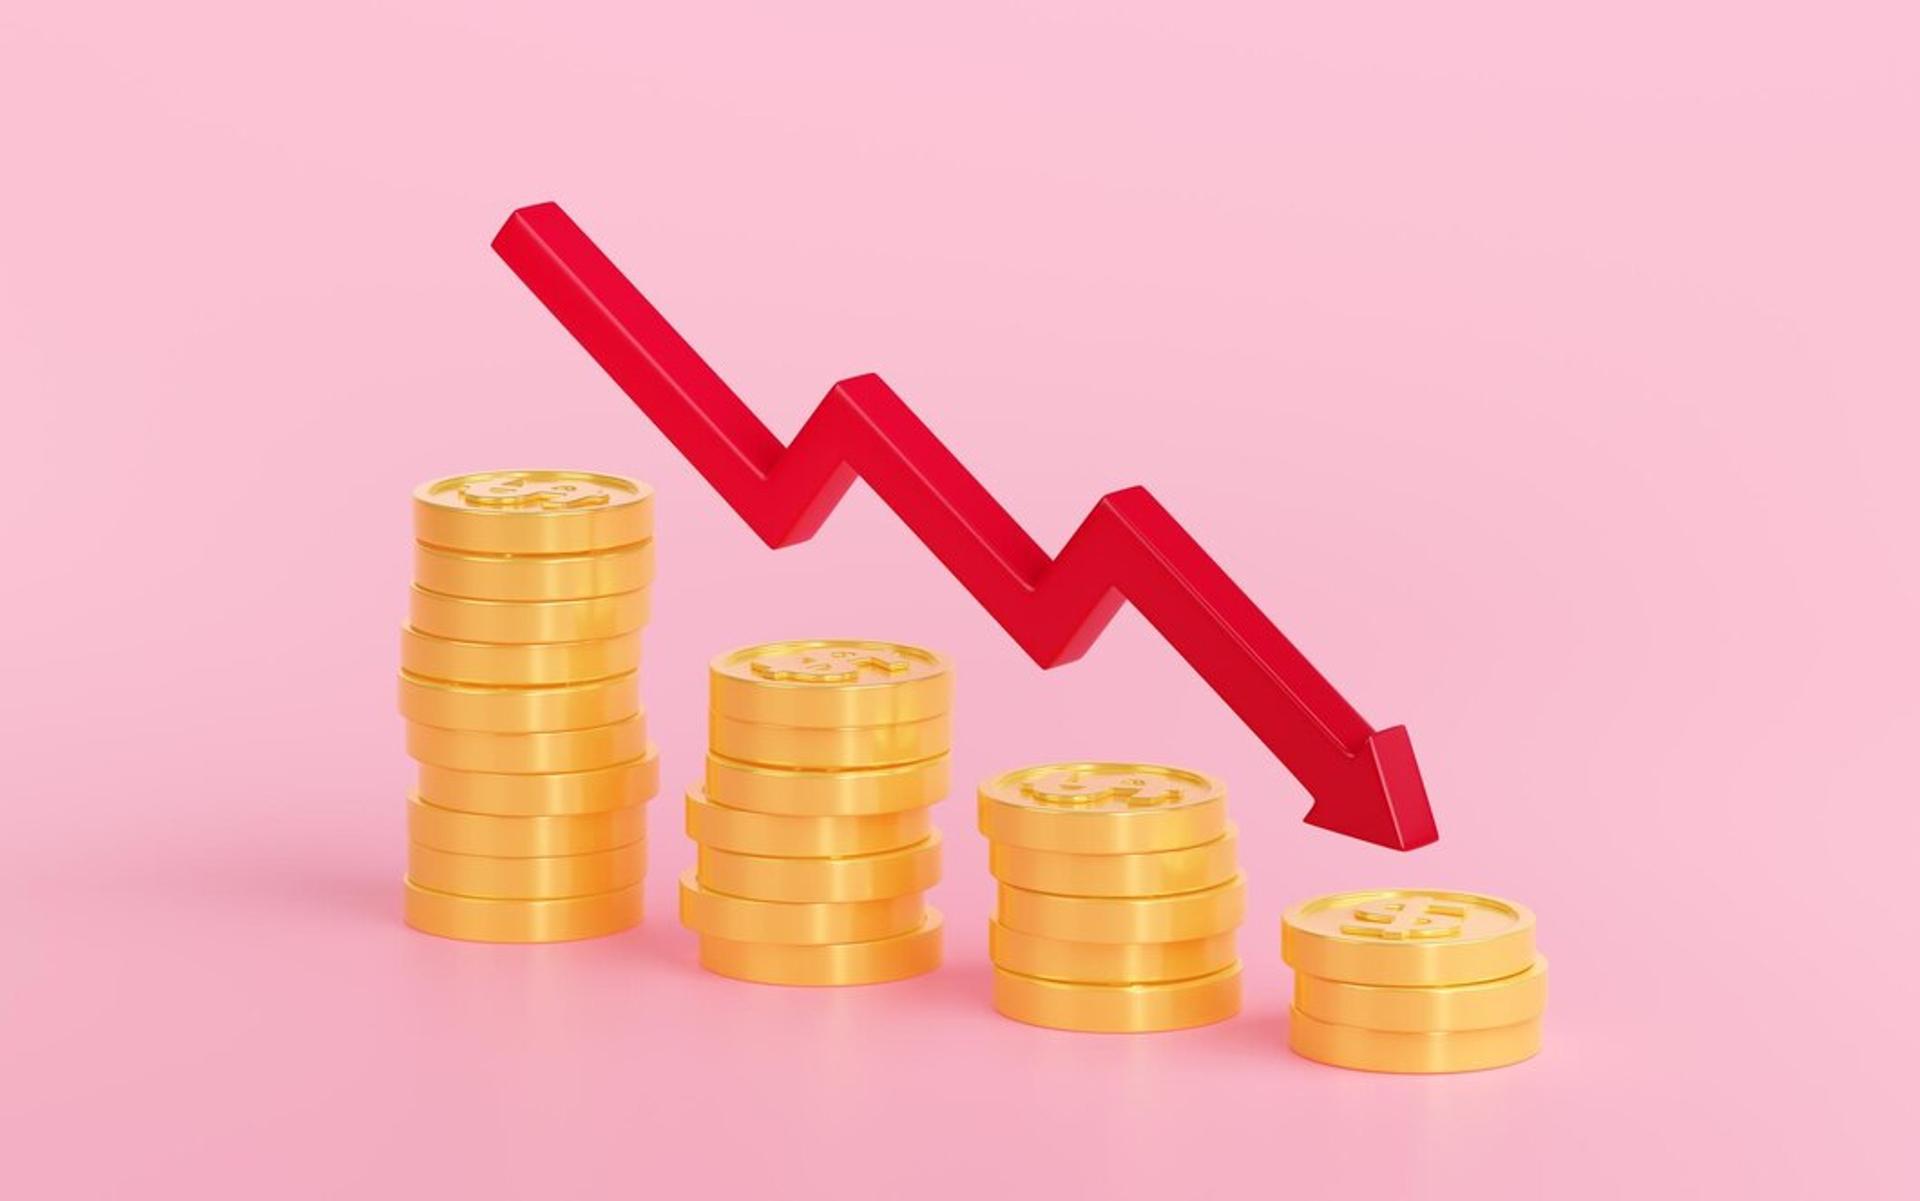 Illustration of coins and a red downturned arrow on a pink background showing deflation